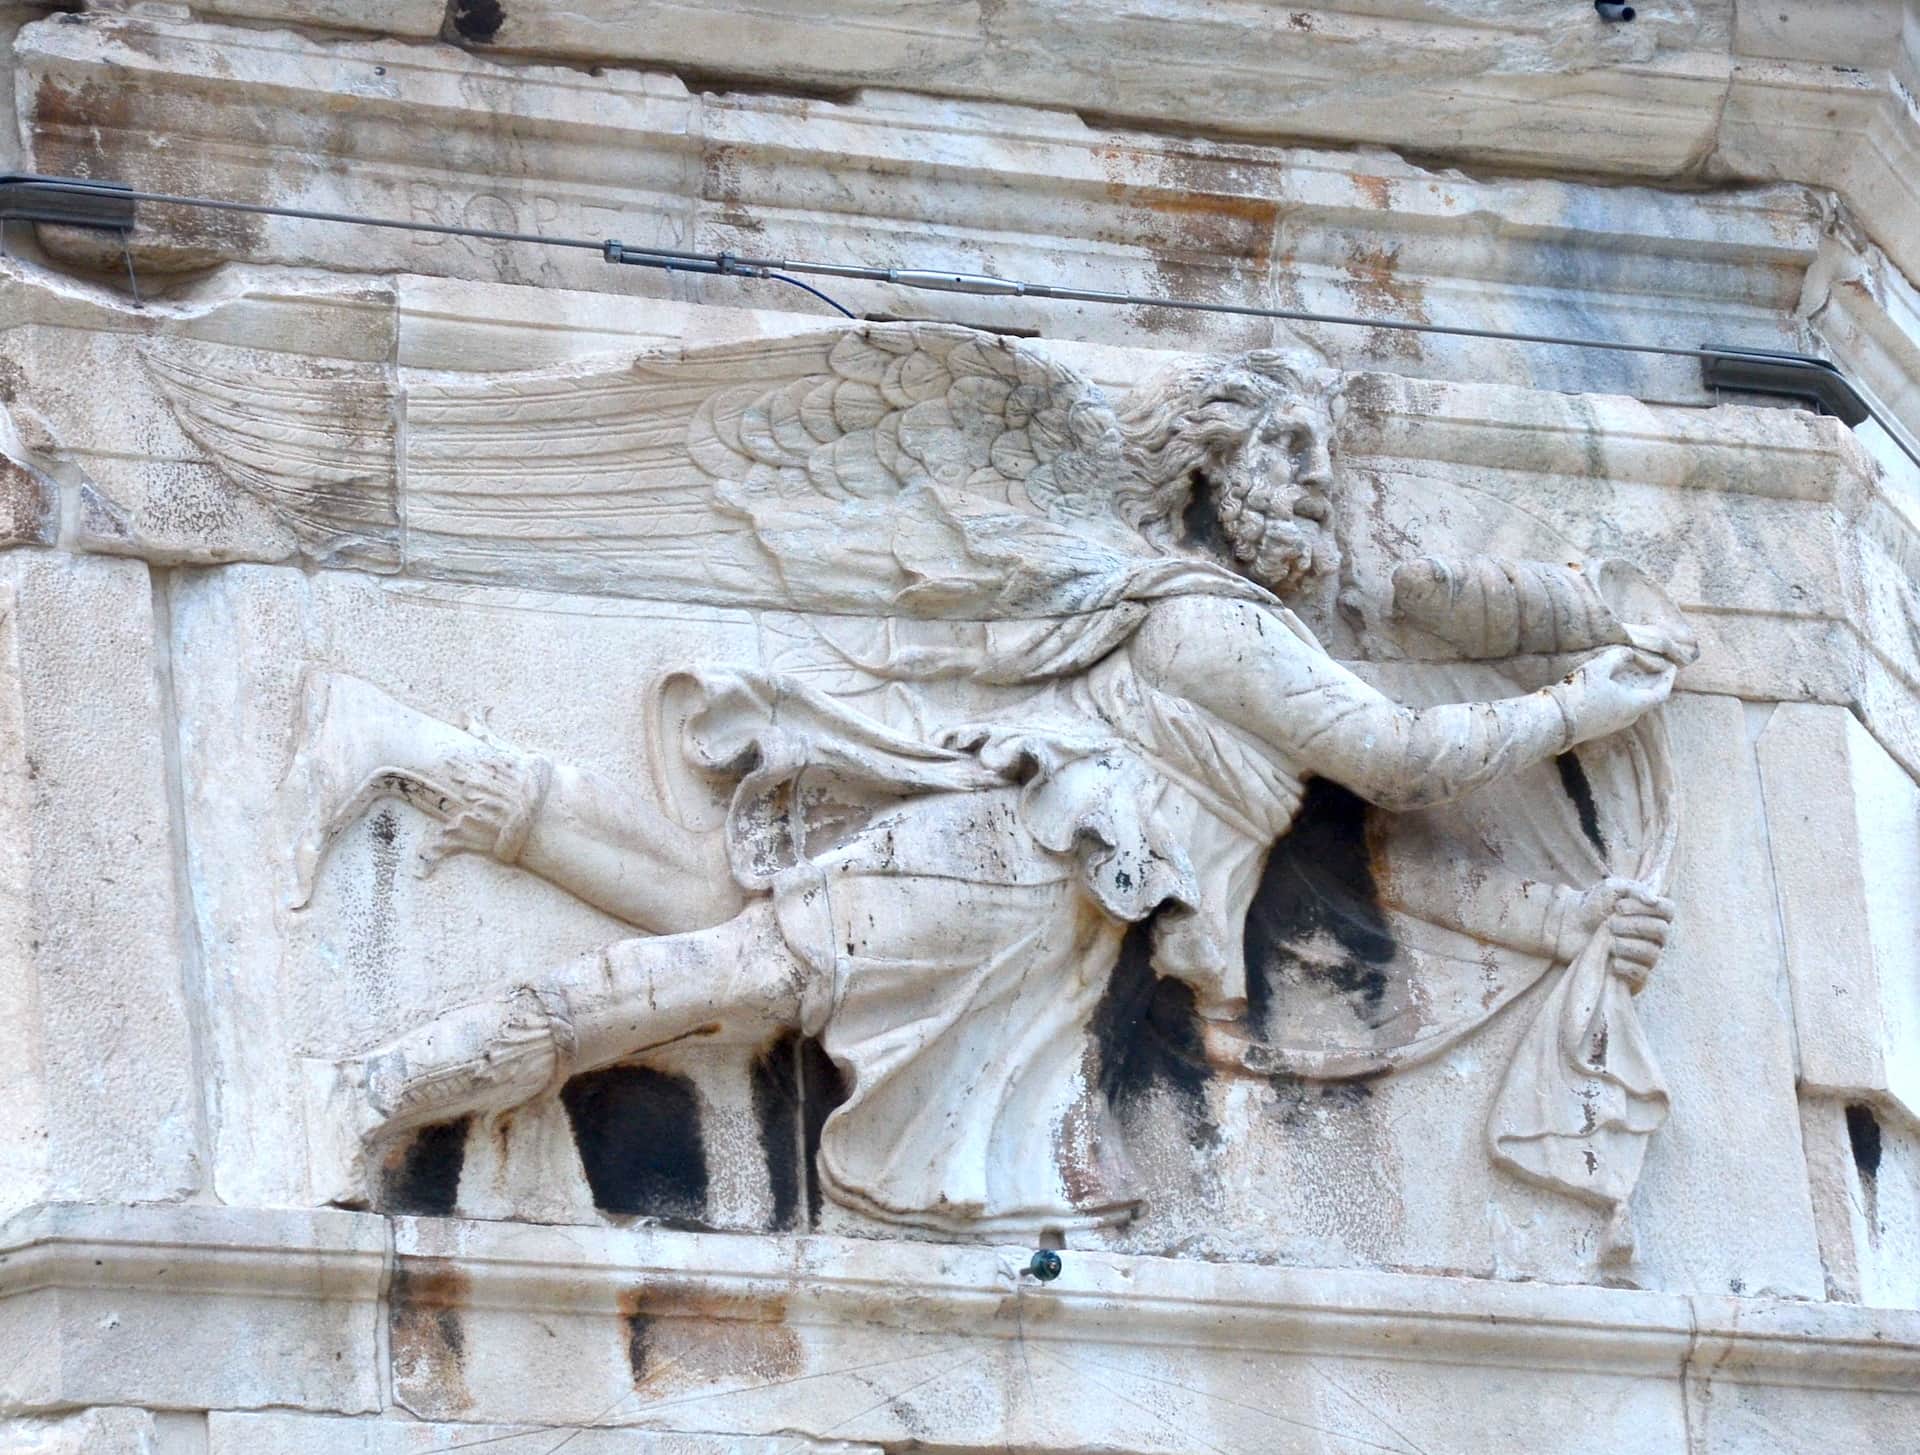 Boreas (North) on the Tower of the Winds at the Roman Agora in Athens, Greece